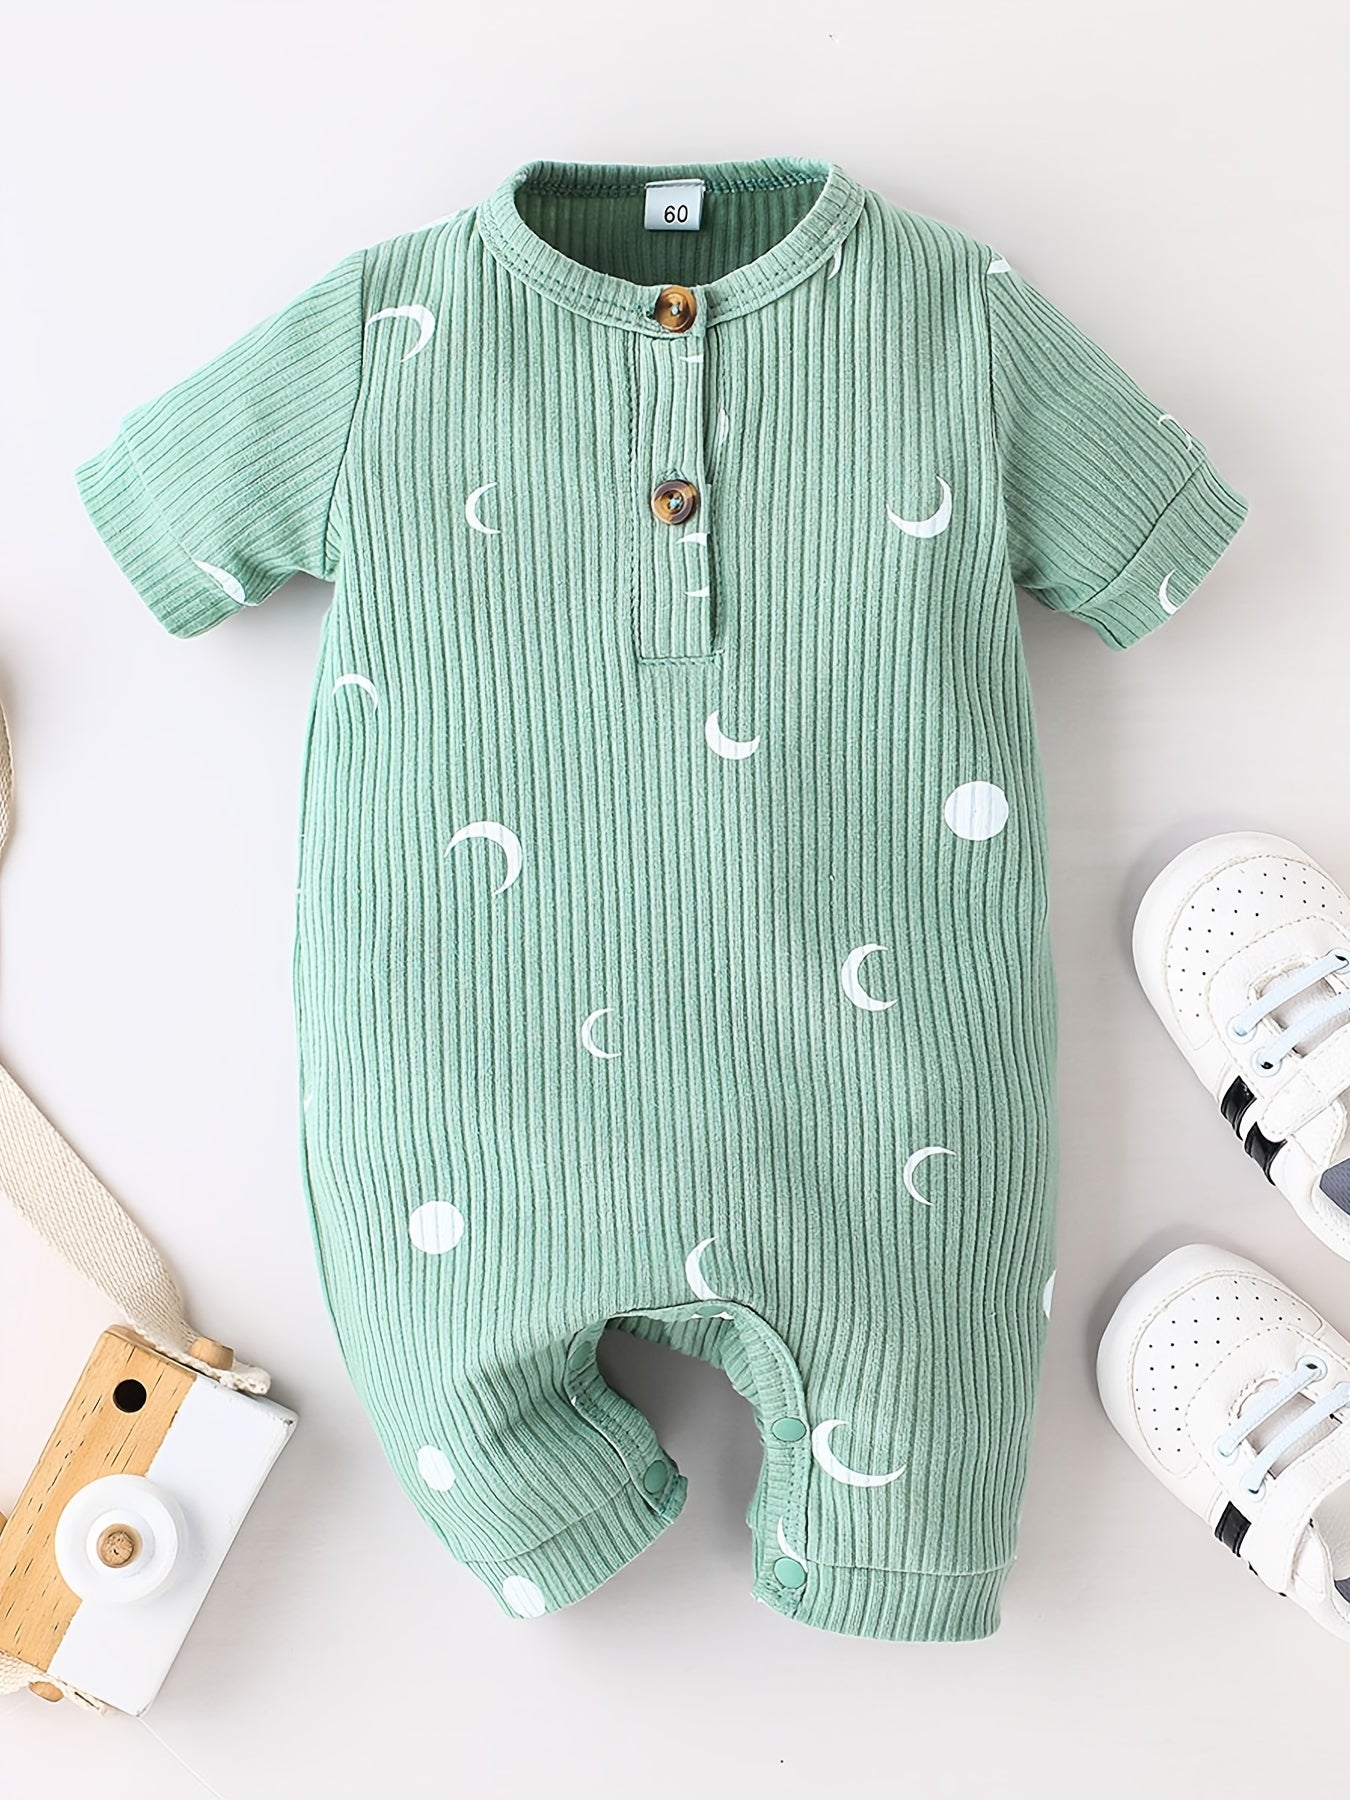 Unisex Baby Short Sleeve Ribbed Romper, Moon Print Bodysuit Onesie, Baby Clothes Baby Layette Sets